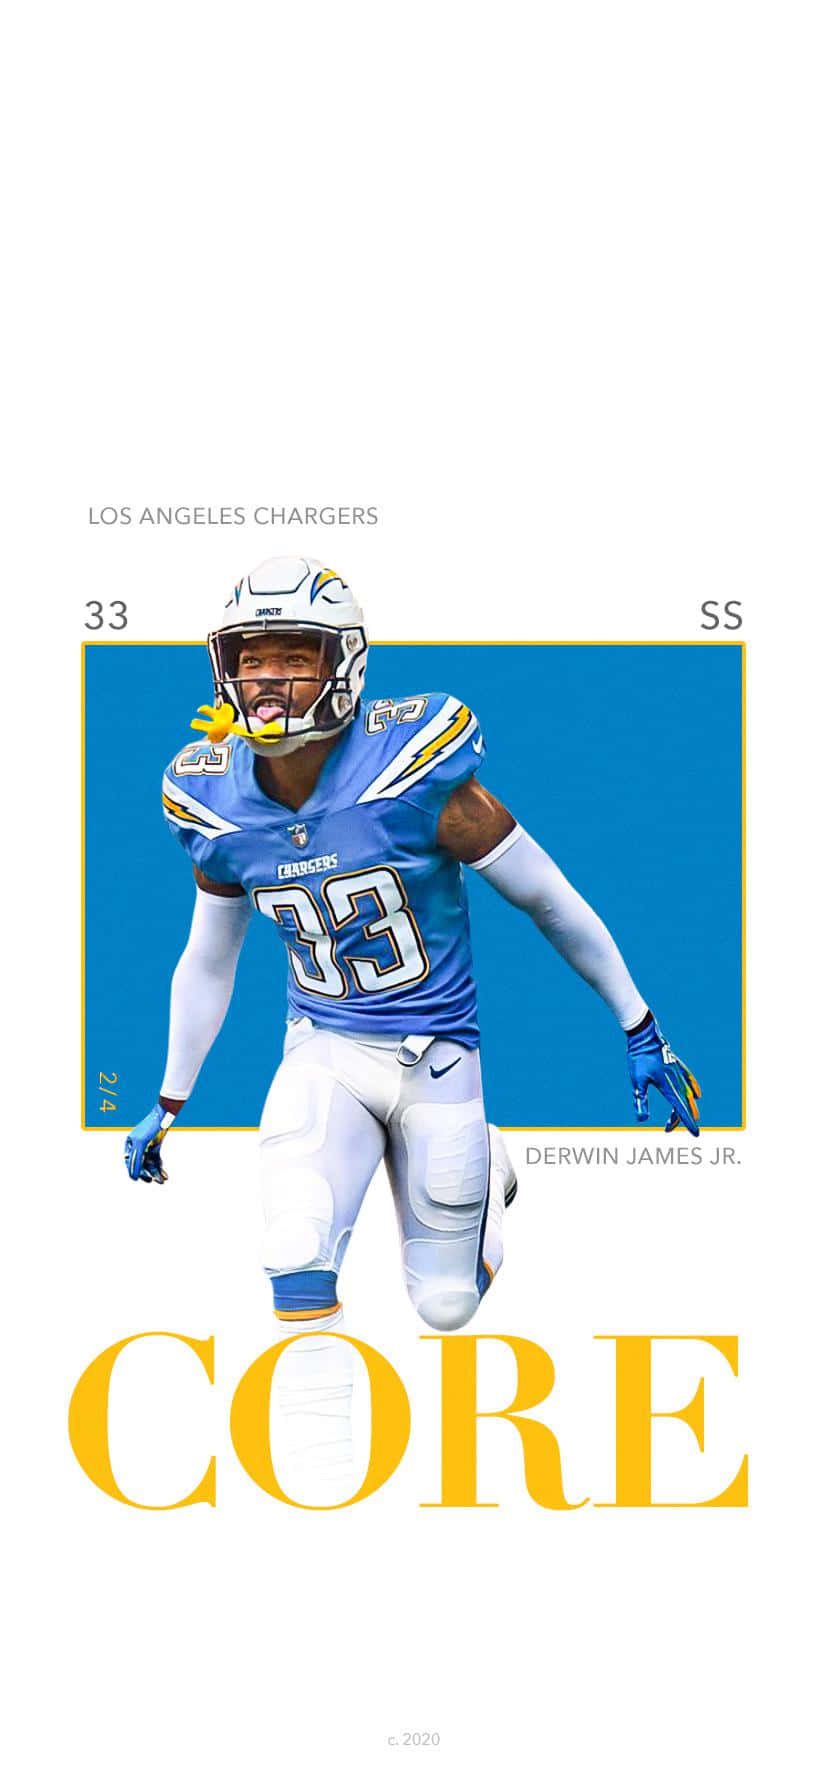 Los Angeles Chargers' Star Safety, Derwin James in action. Wallpaper